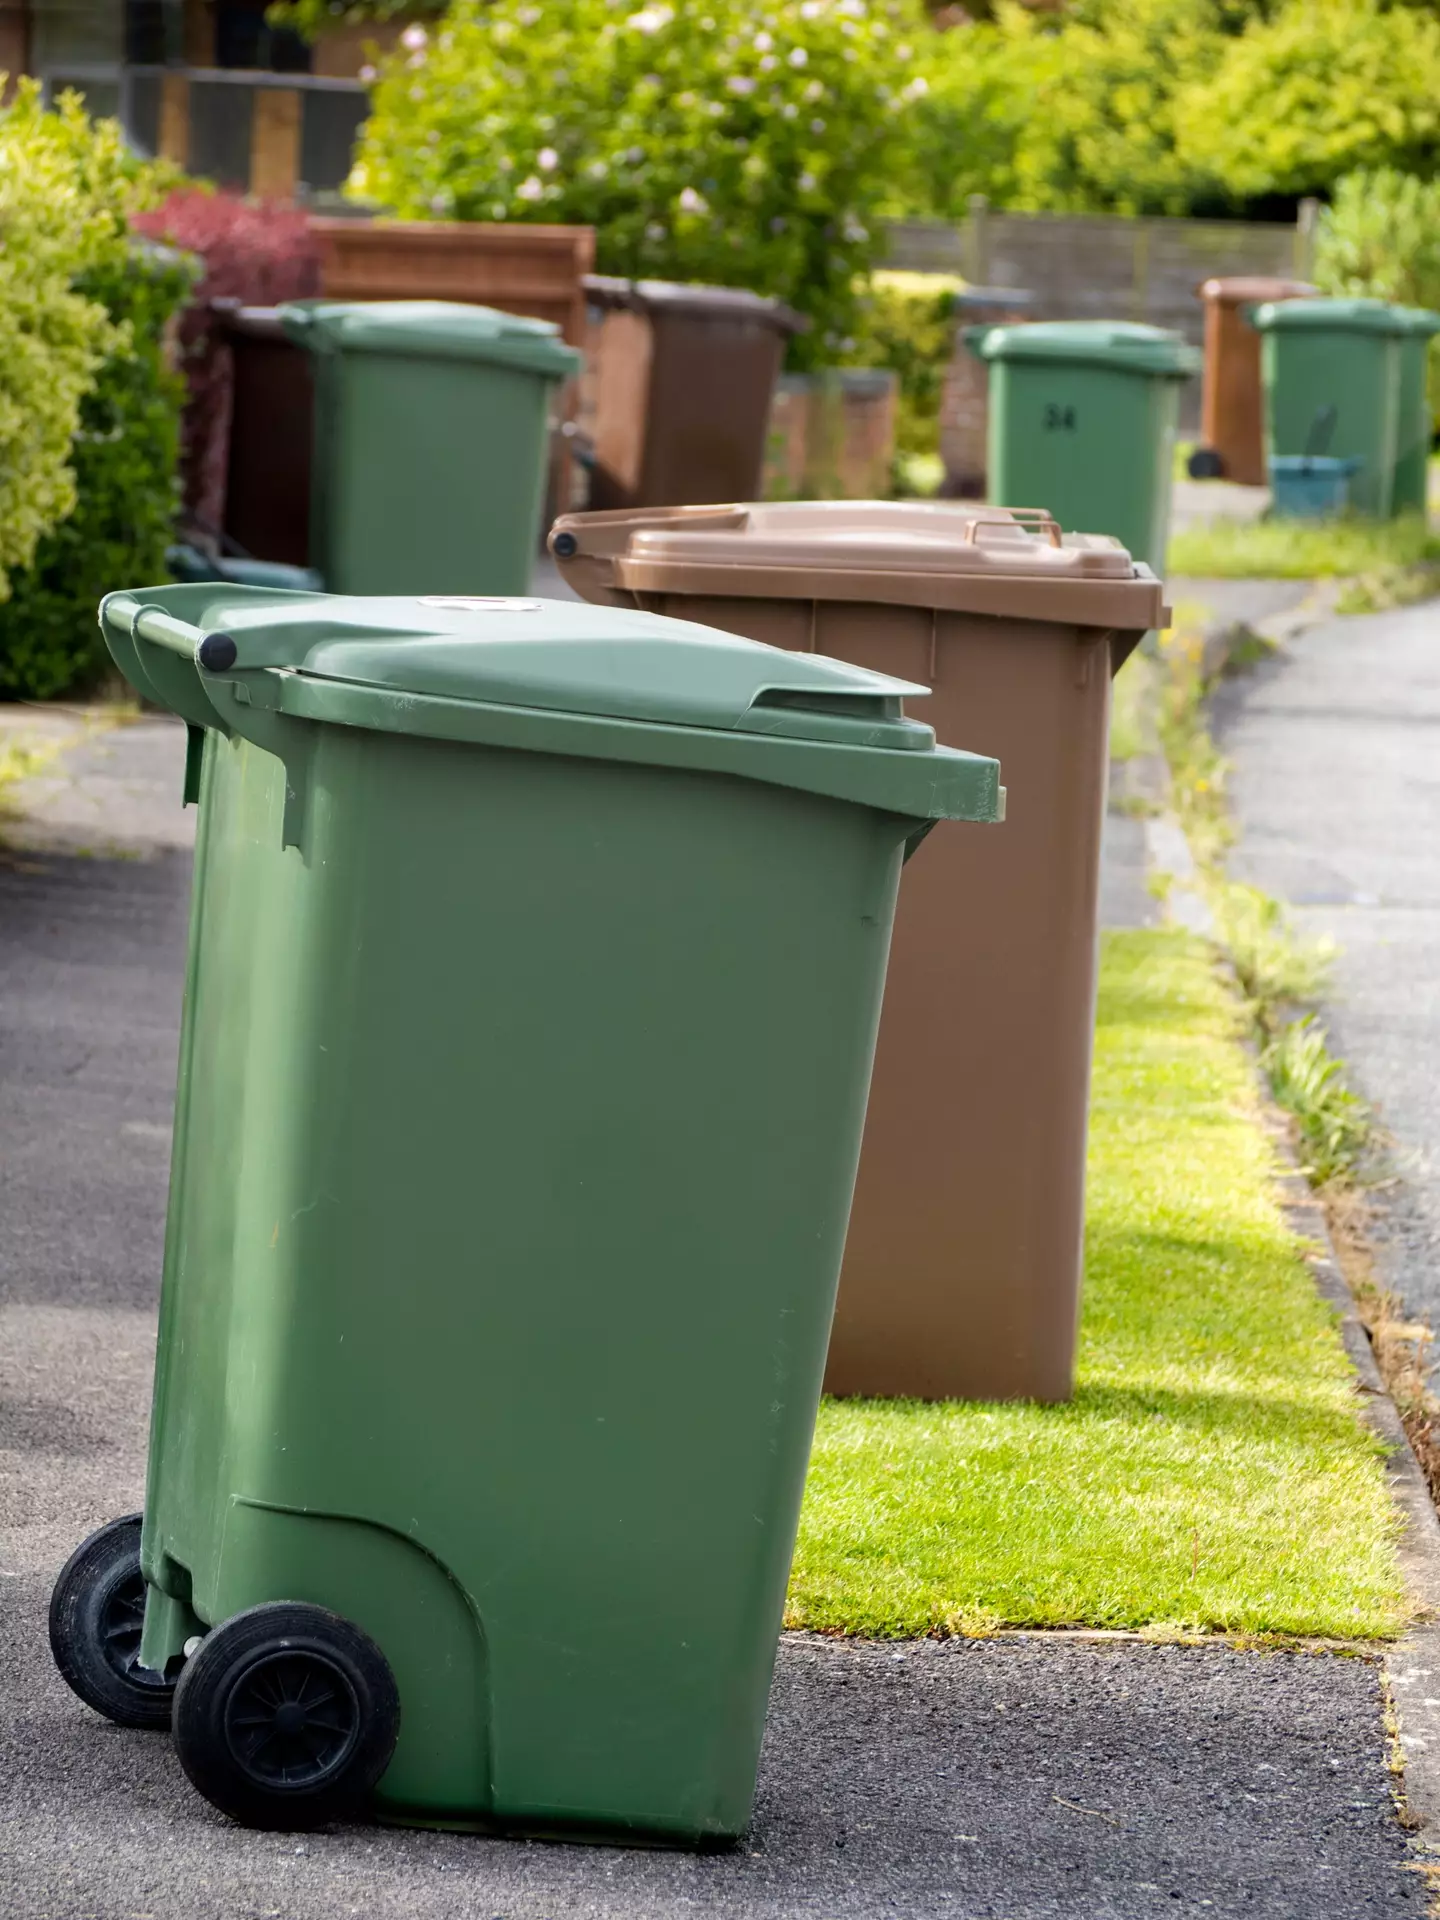 Ministers hope recycling rates will increase following the new changes.